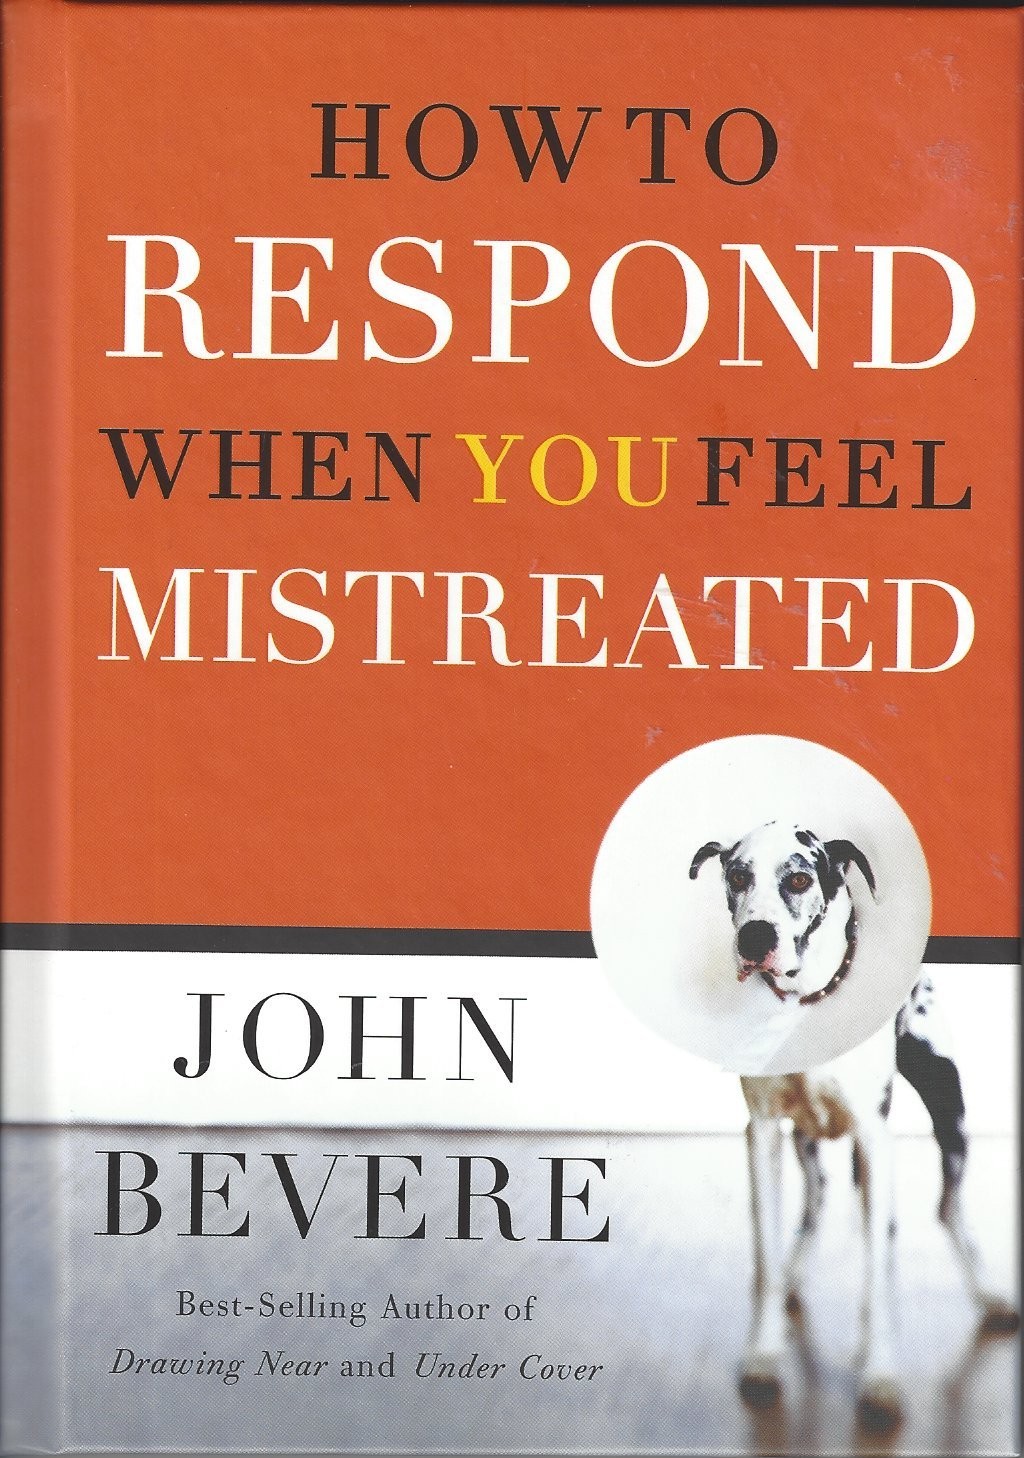 How To Respond When You Feel Mistreated  (2004)  Front